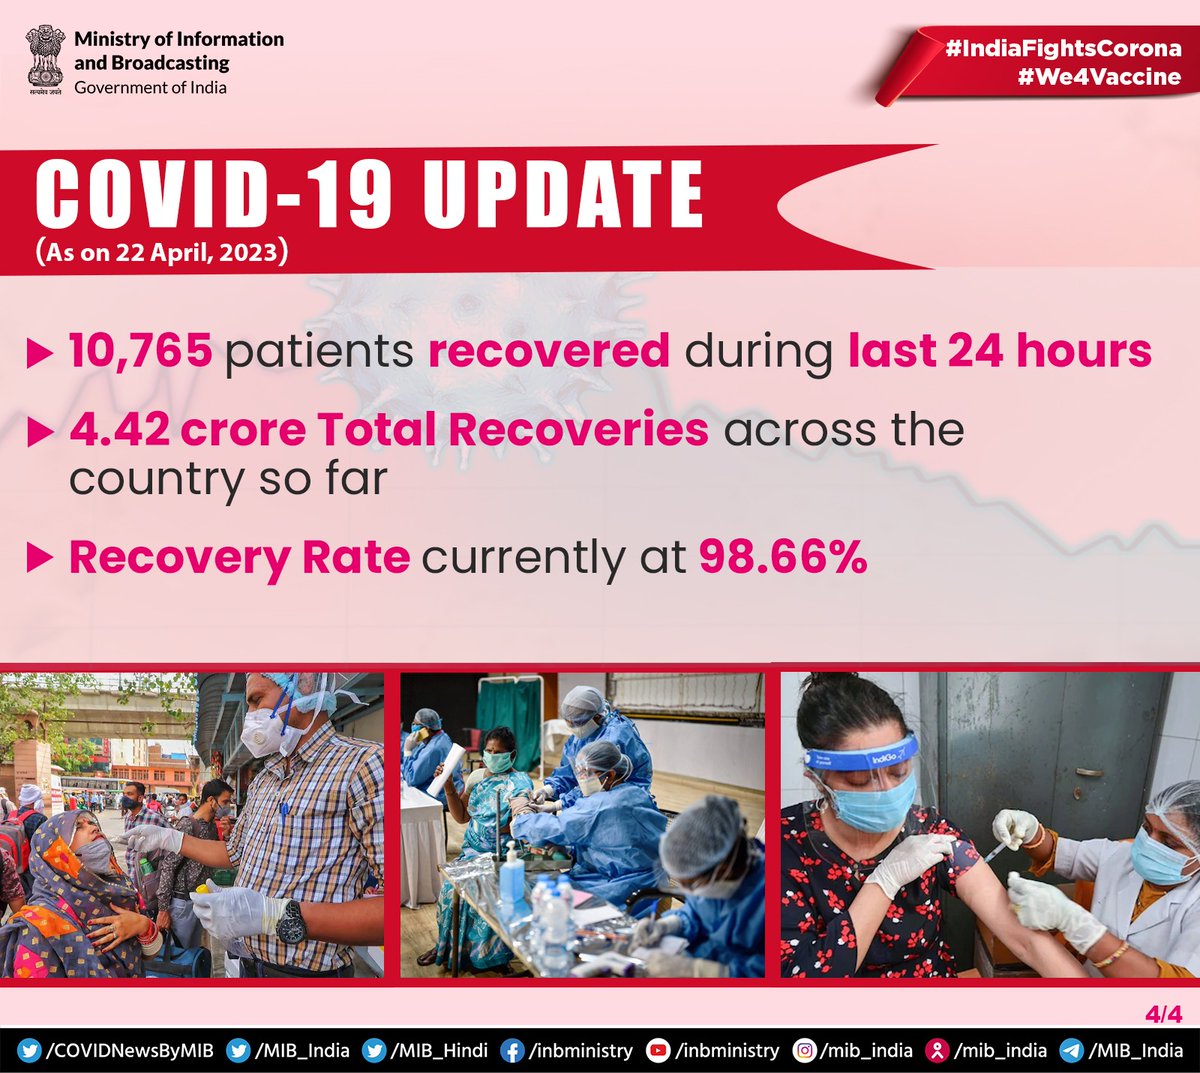 #IndiaFightsCorona:

#COVID19 UPDATE (As on 22nd April, 2023)

➡️10,765 patients recovered during the last 24 hours

➡️4.42 crore total recoveries across the country so far

➡️Recovery rate currently at 98.66%

#Unite2FightCorona
#COVID19Update
#LargestVaccineDrive
#We4Vaccine